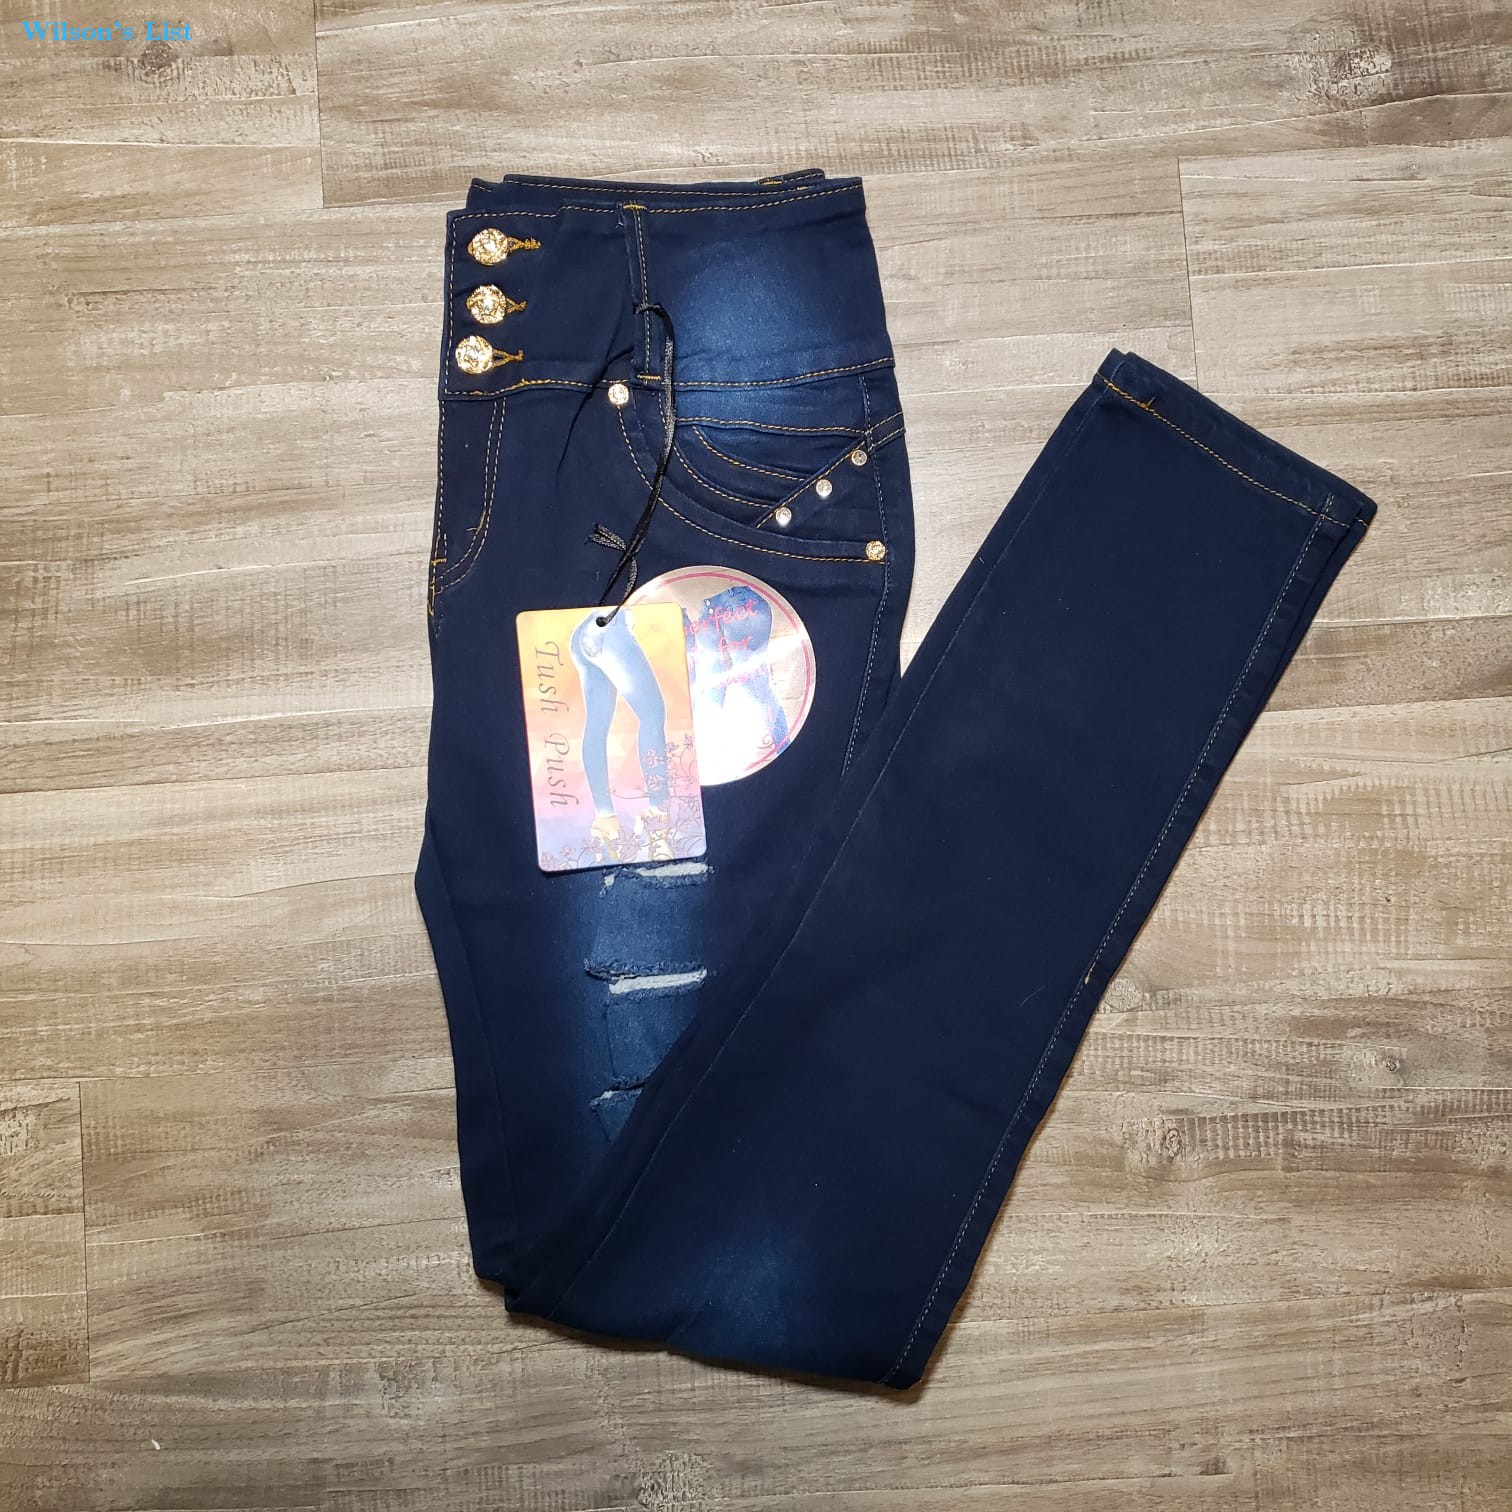 Tush push colombian 1461 med blue stretch levanta cola high waist skinny jeans 